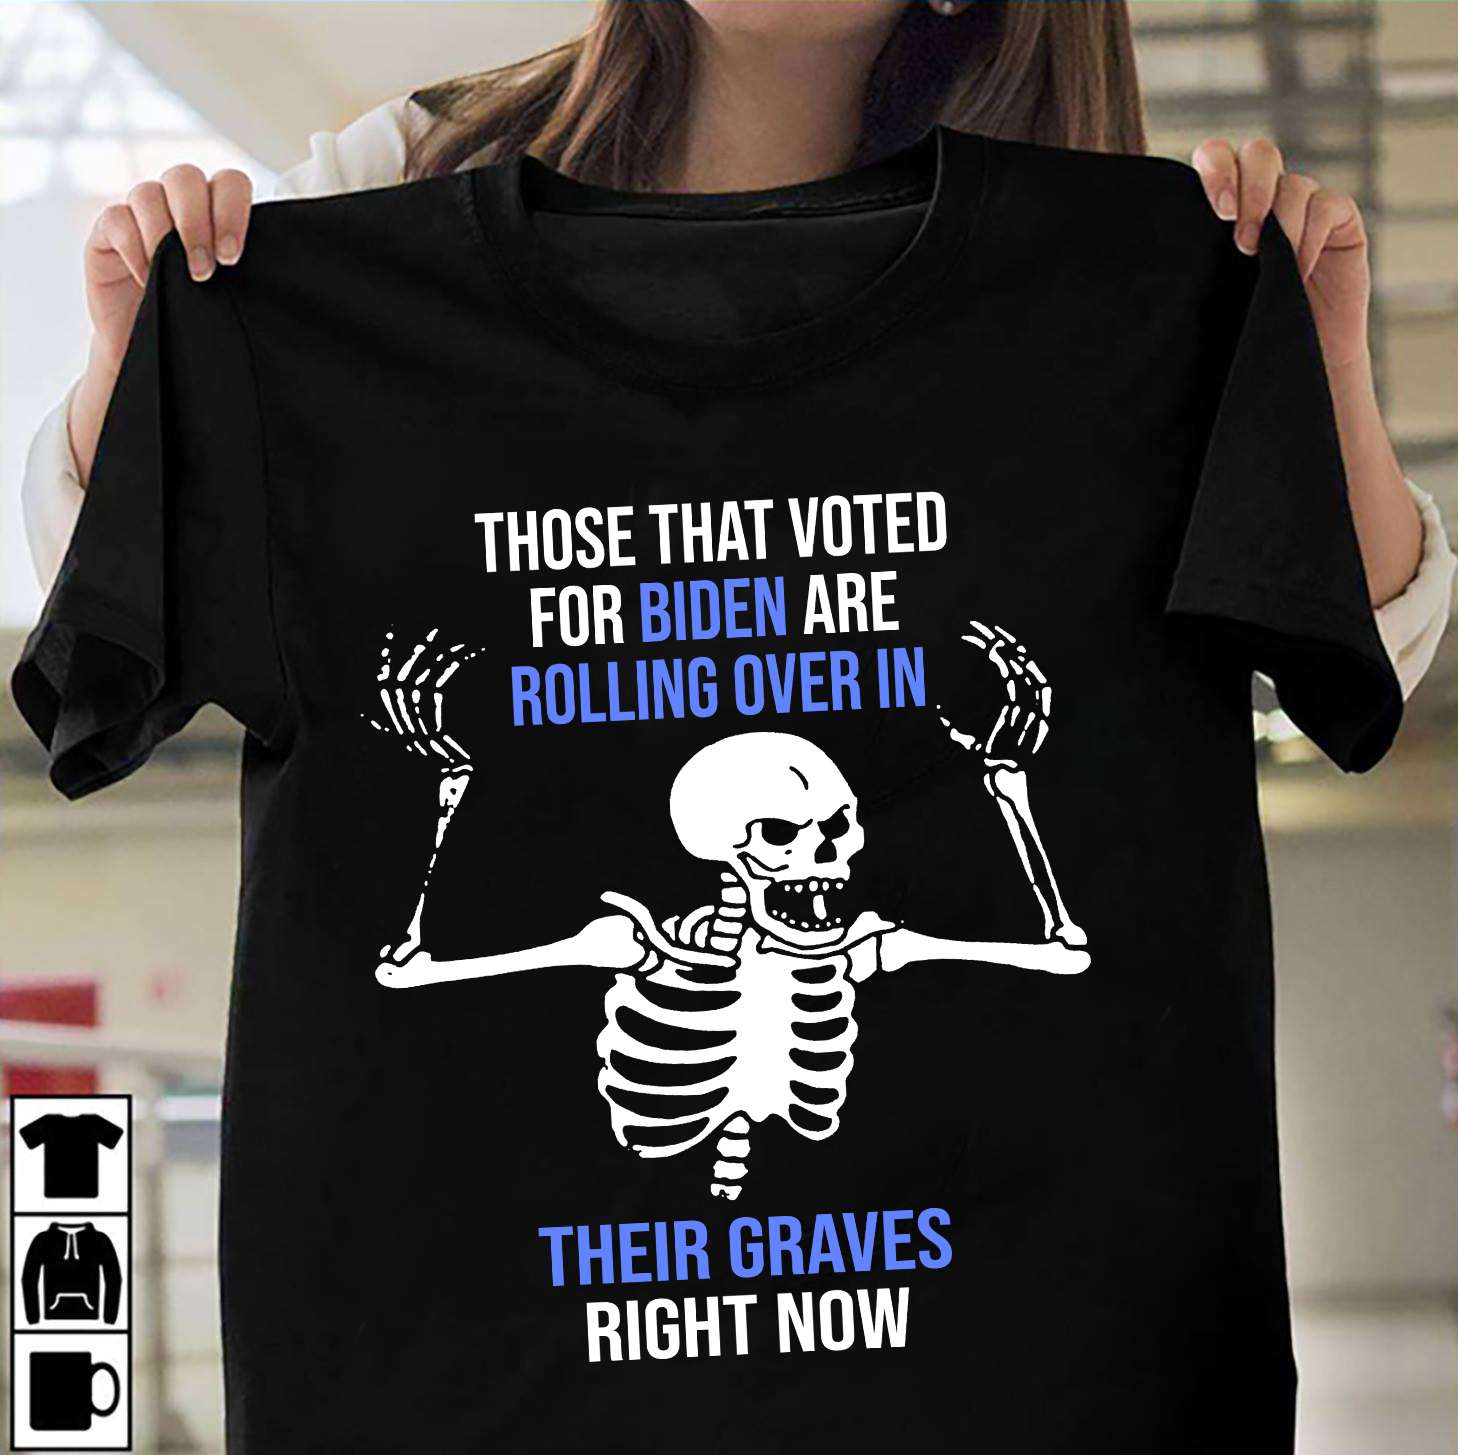 Those that voted for biden are rolling over in their graves right now - Angry Skeleton